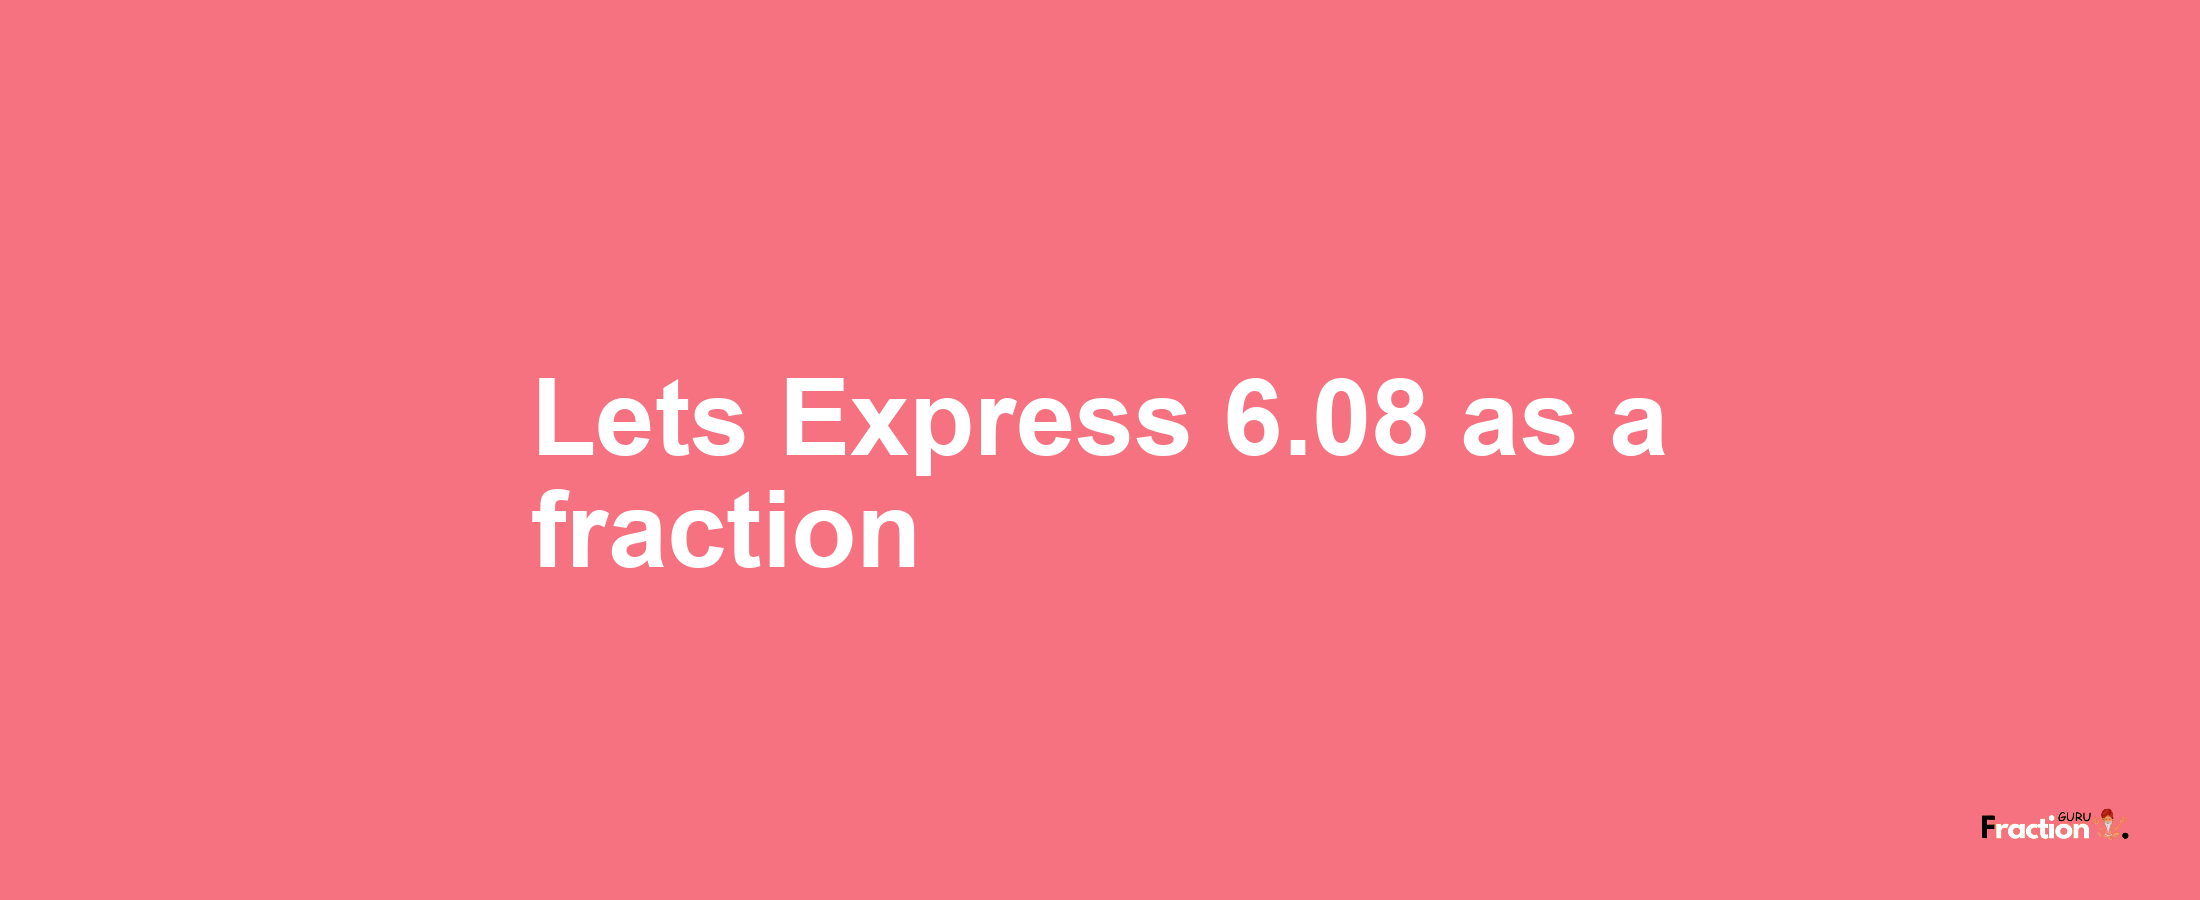 Lets Express 6.08 as afraction